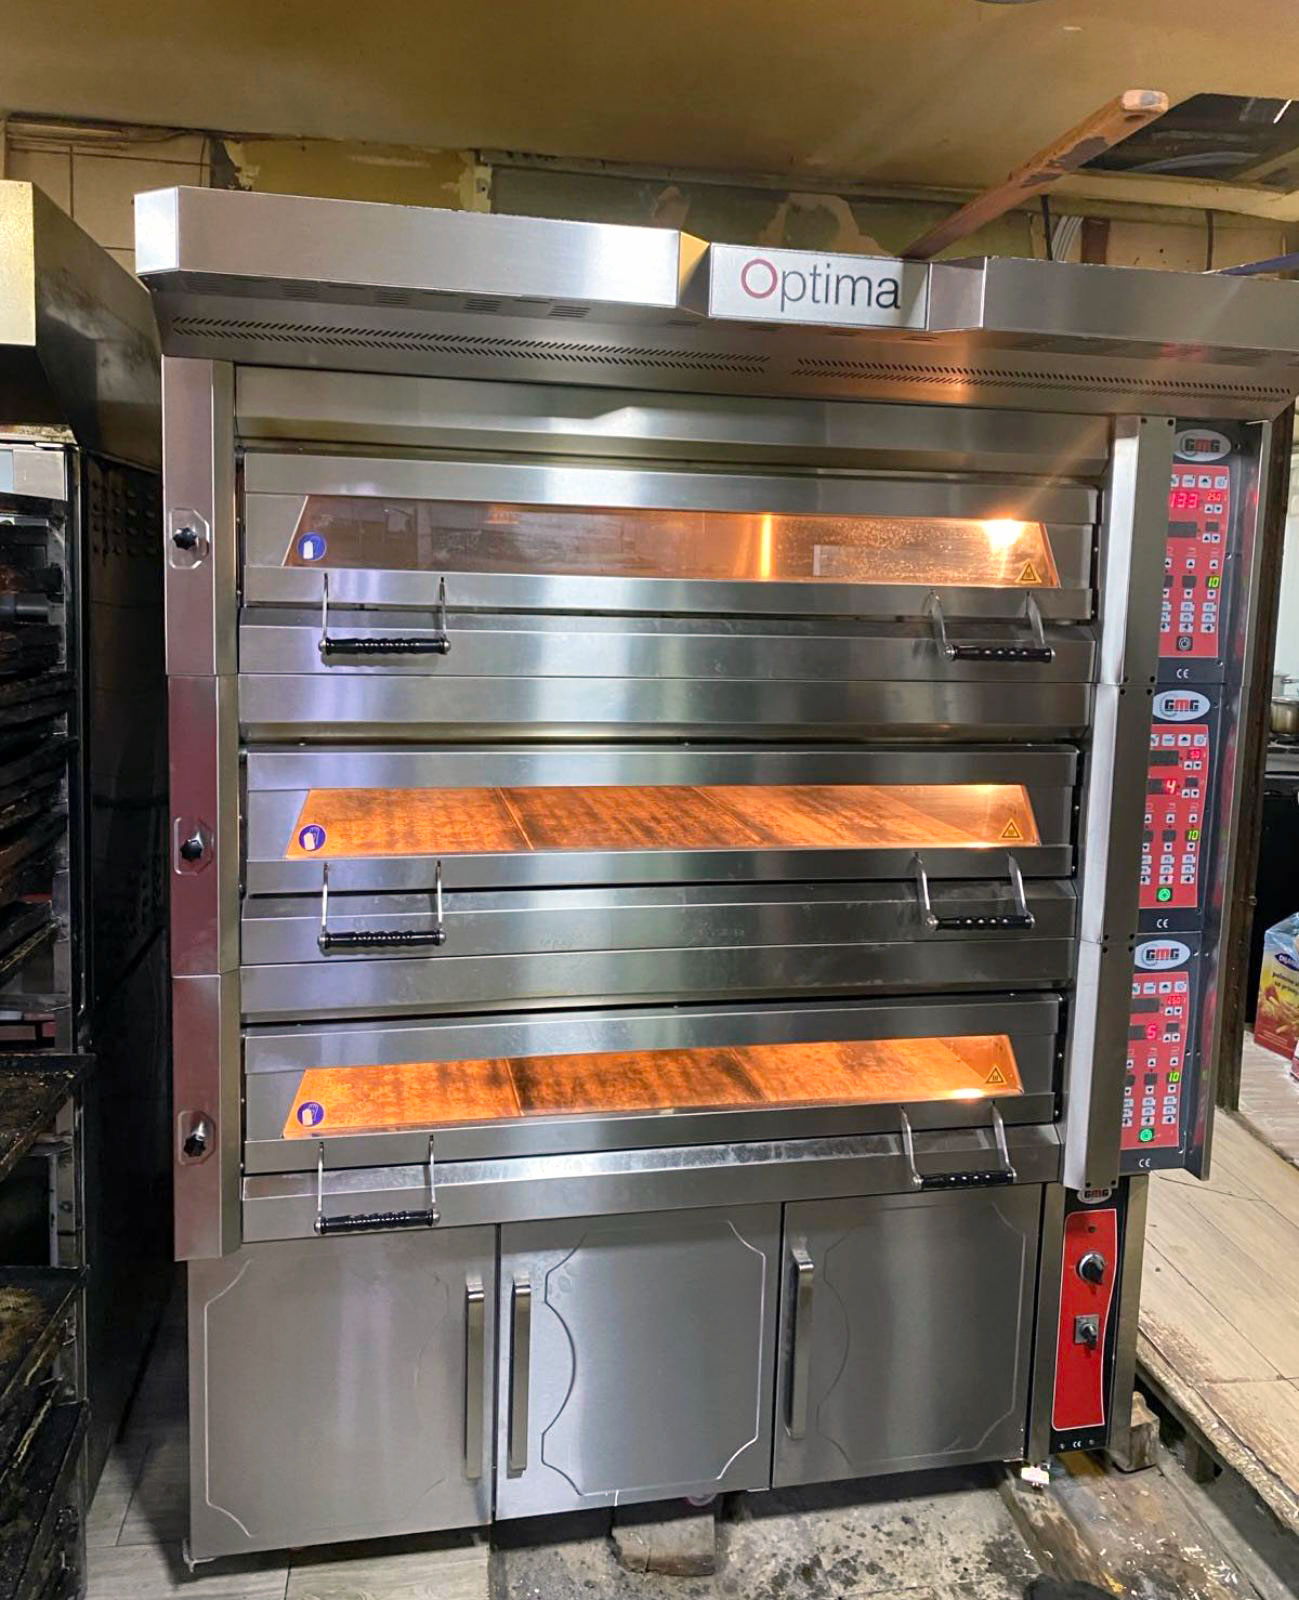 Commissioning of the GMG Optima bakery oven